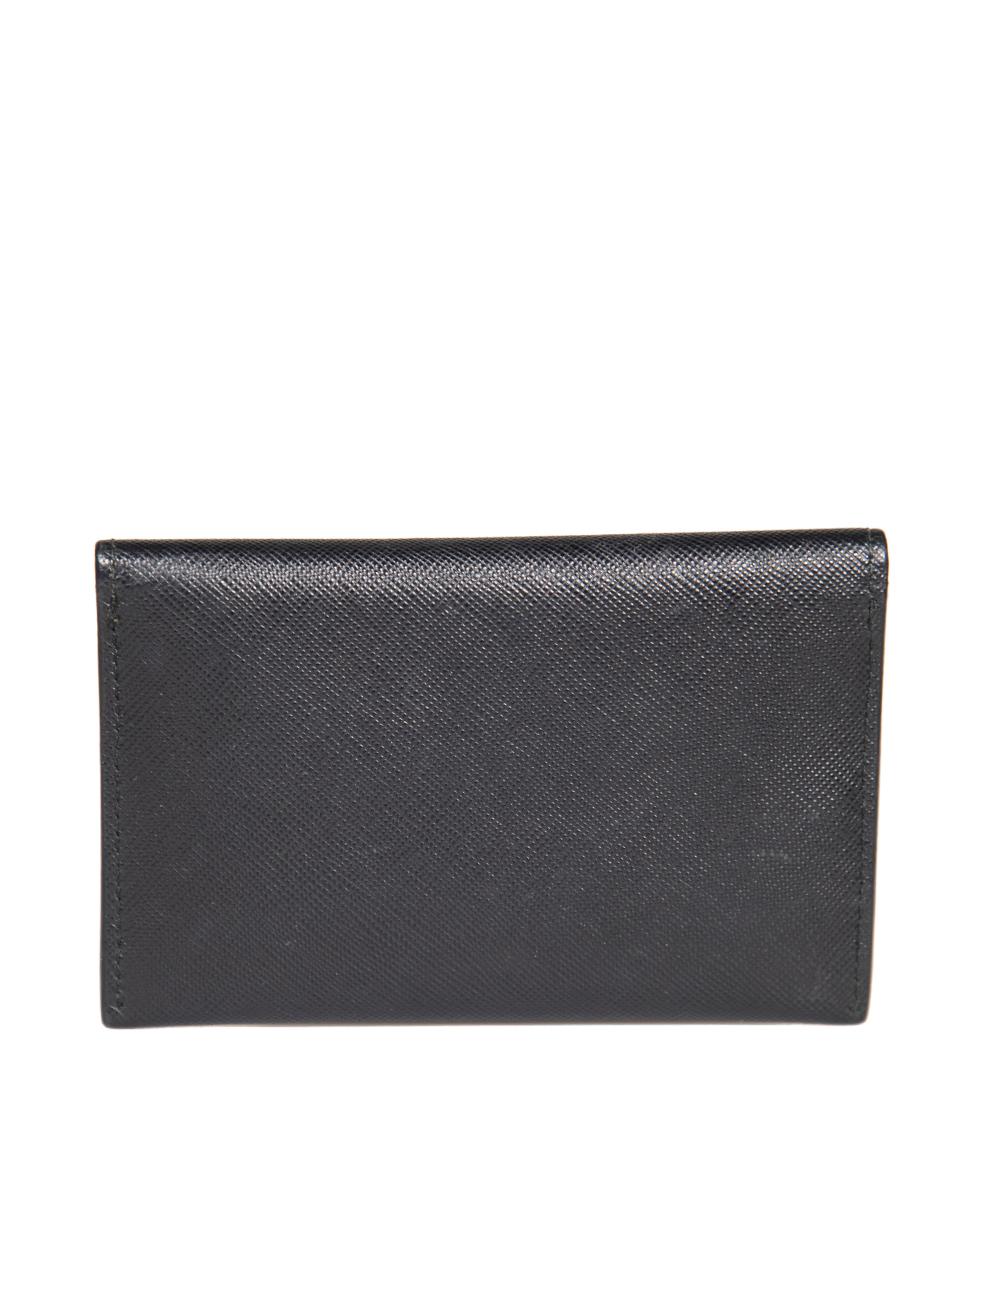 Prada Black Saffiano Leather Folded Cardholder In Excellent Condition For Sale In London, GB